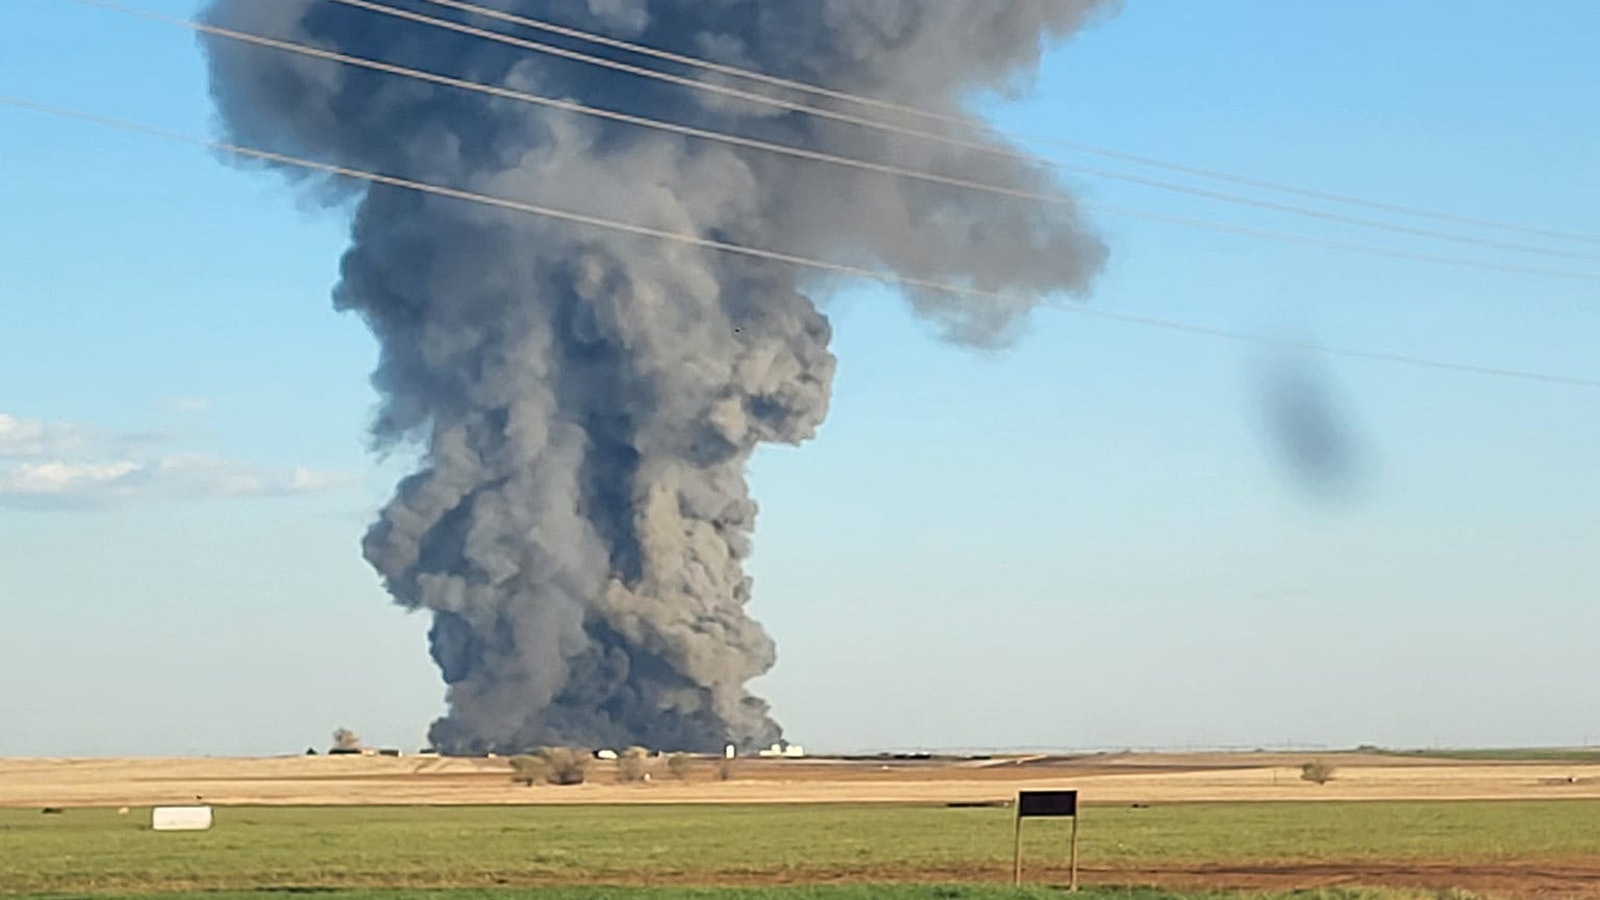 A huge column of smoke could be seen for miles after a dairy farm explosion and fire in Texas that killed 18,000 cows.